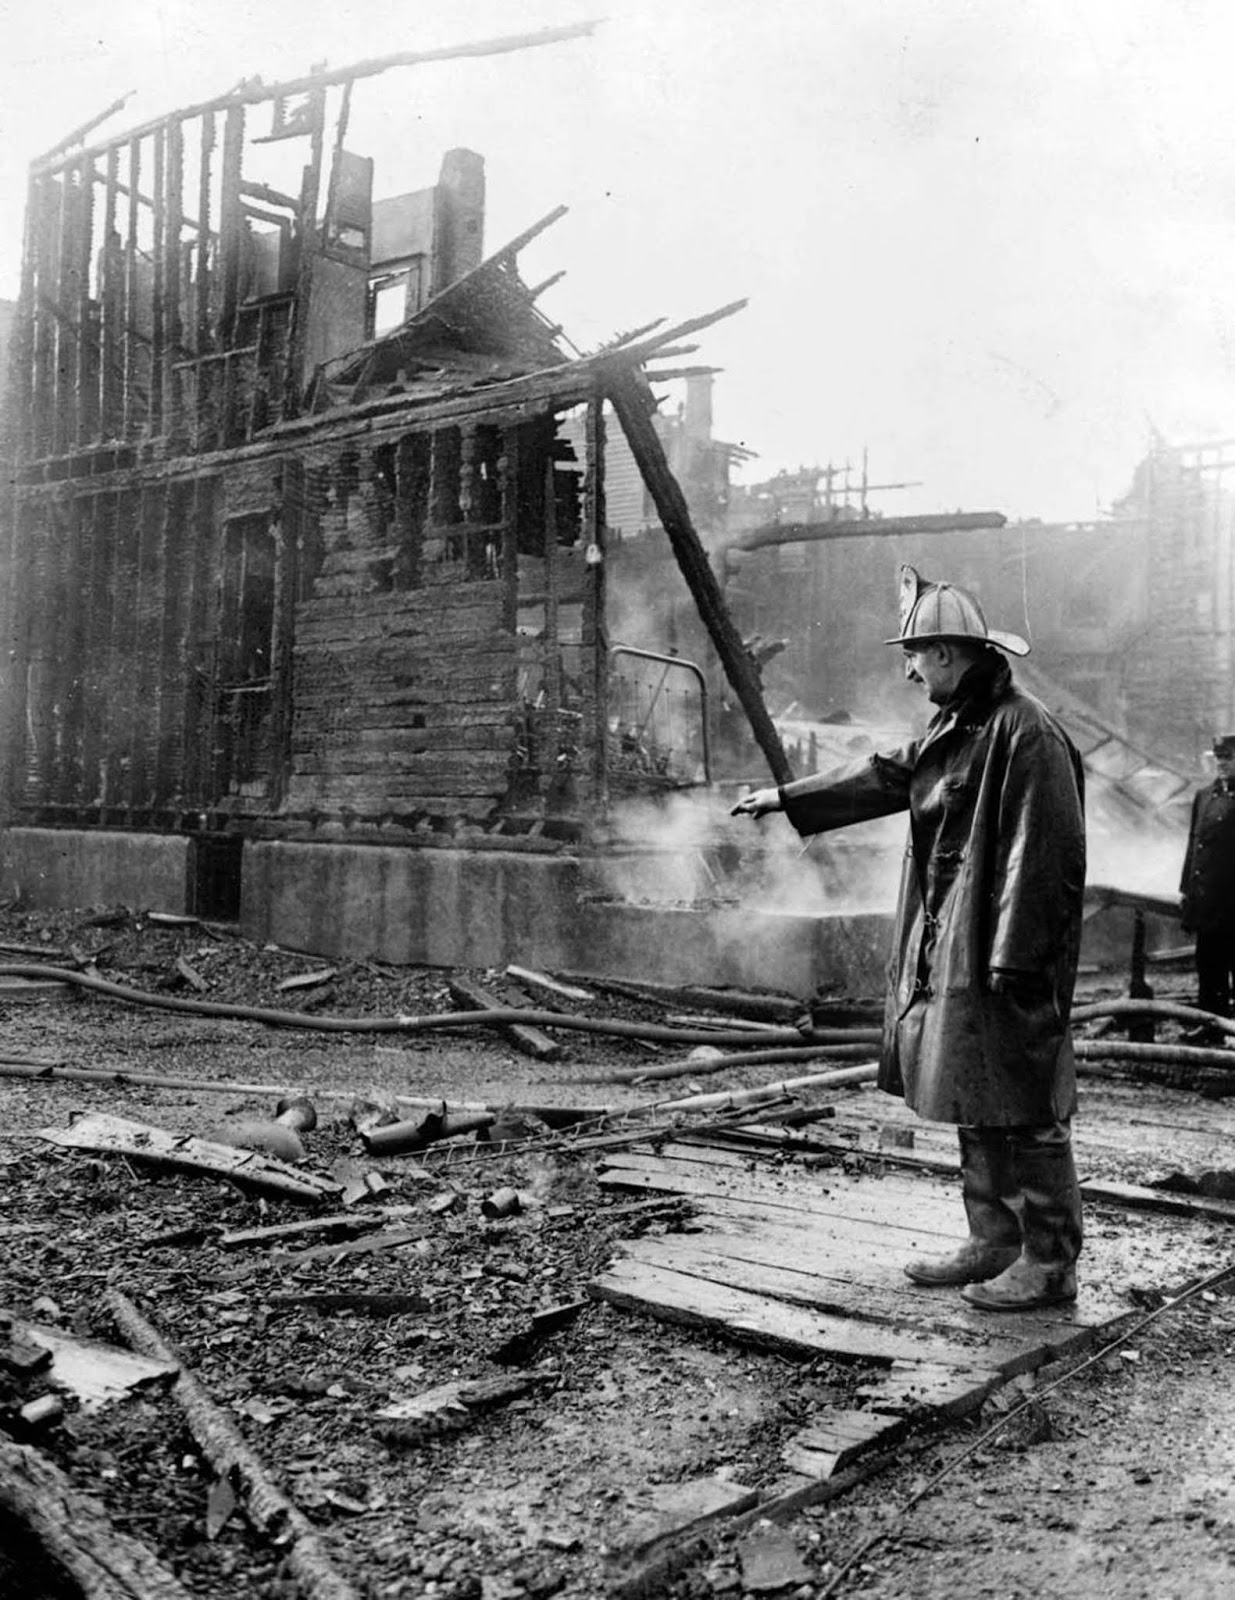 A firefighter looks over a burned out building during the Chicago race riots of 1919.